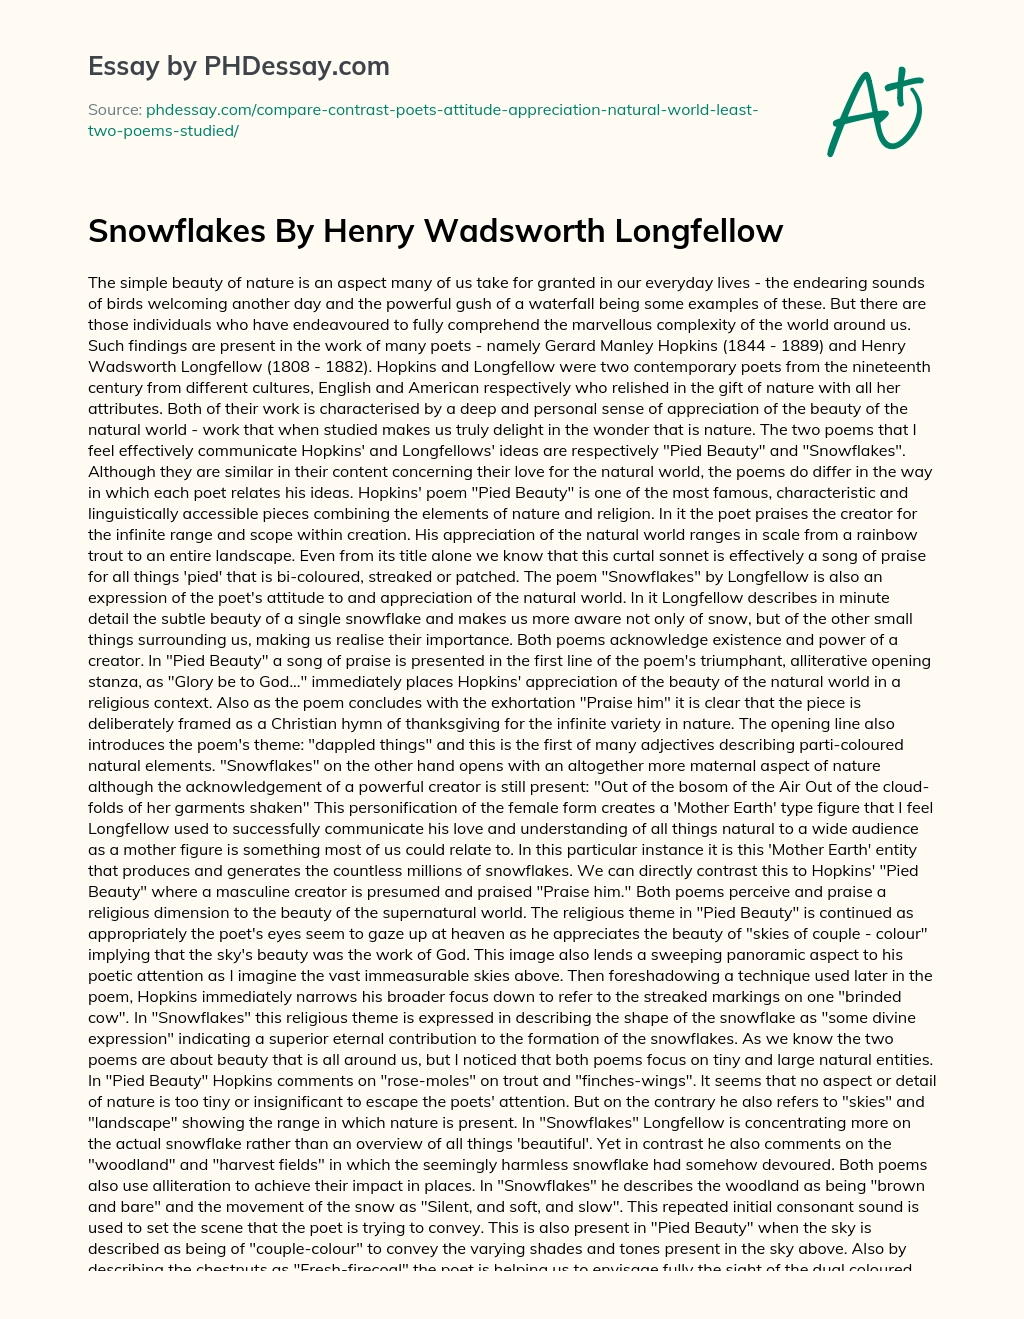 Snowflakes By Henry Wadsworth Longfellow essay